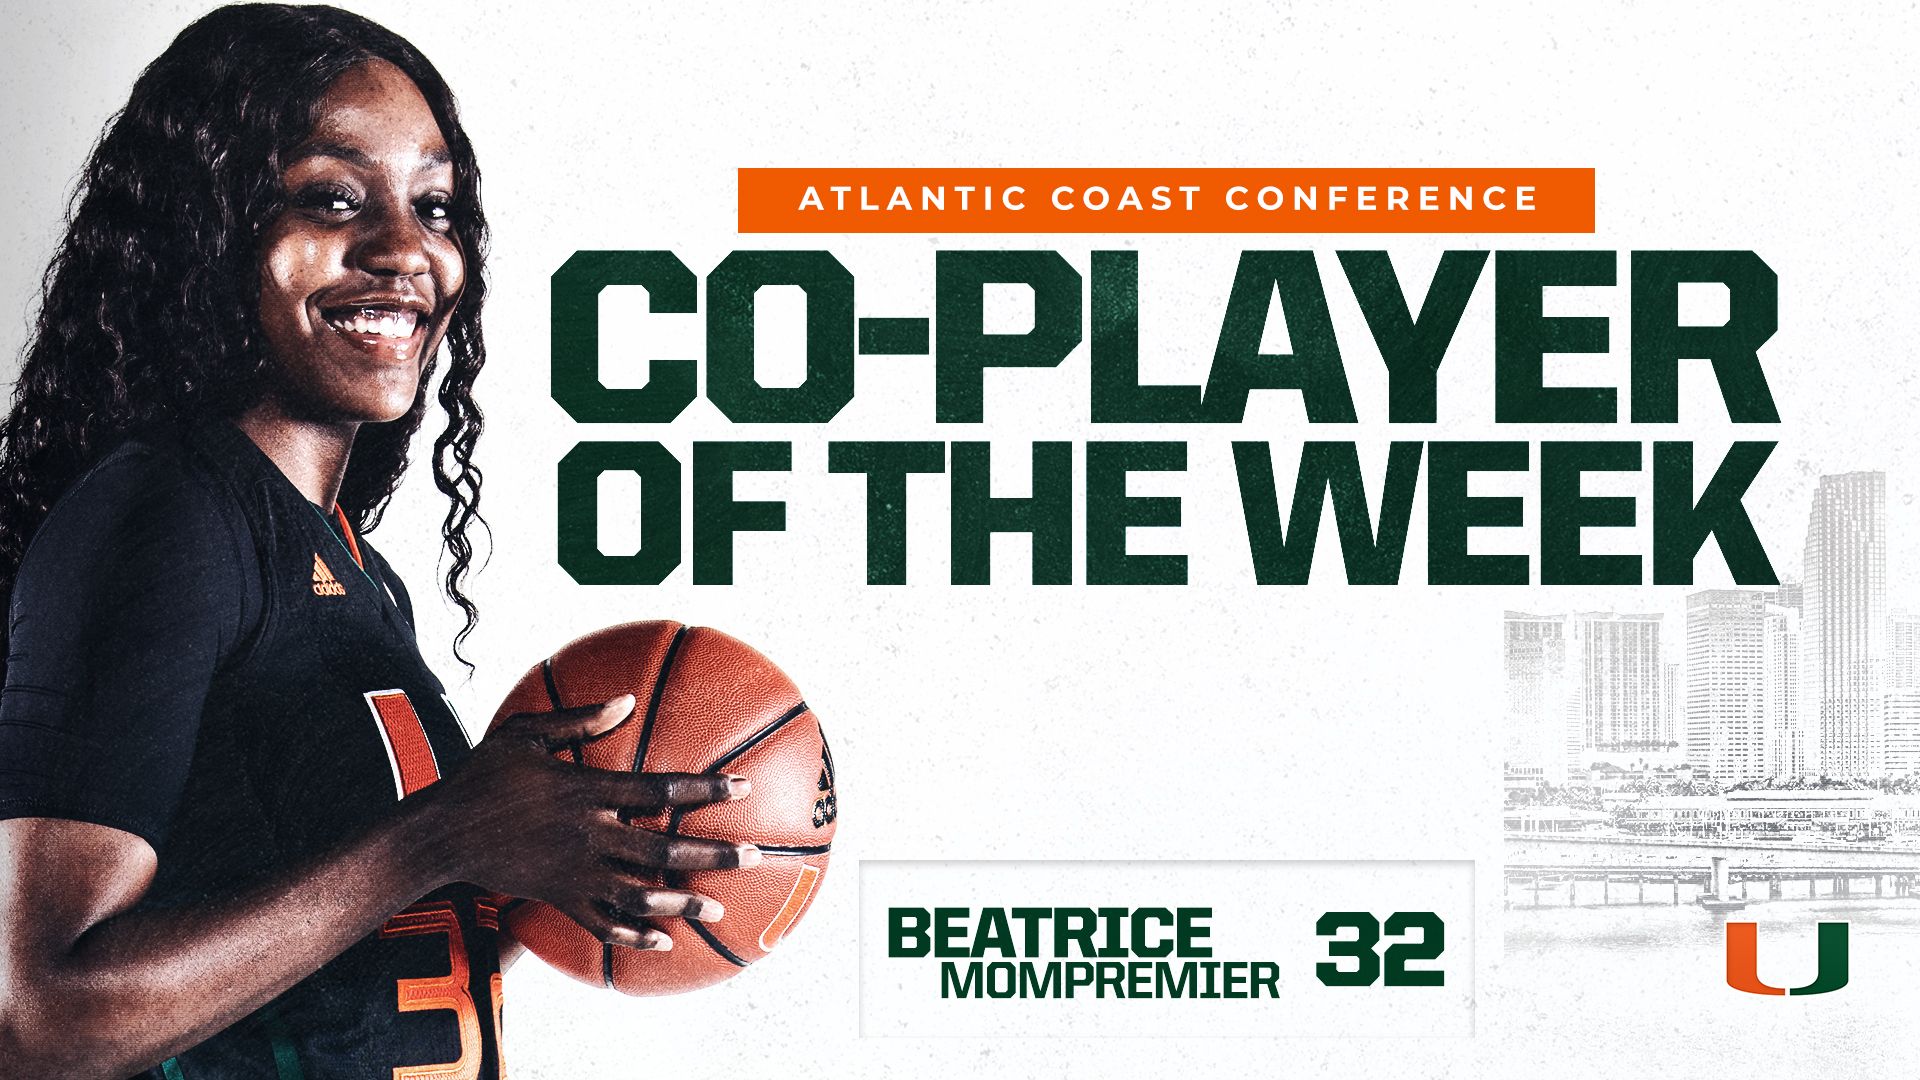 Mompremier Named ACC Co-Player of the Week